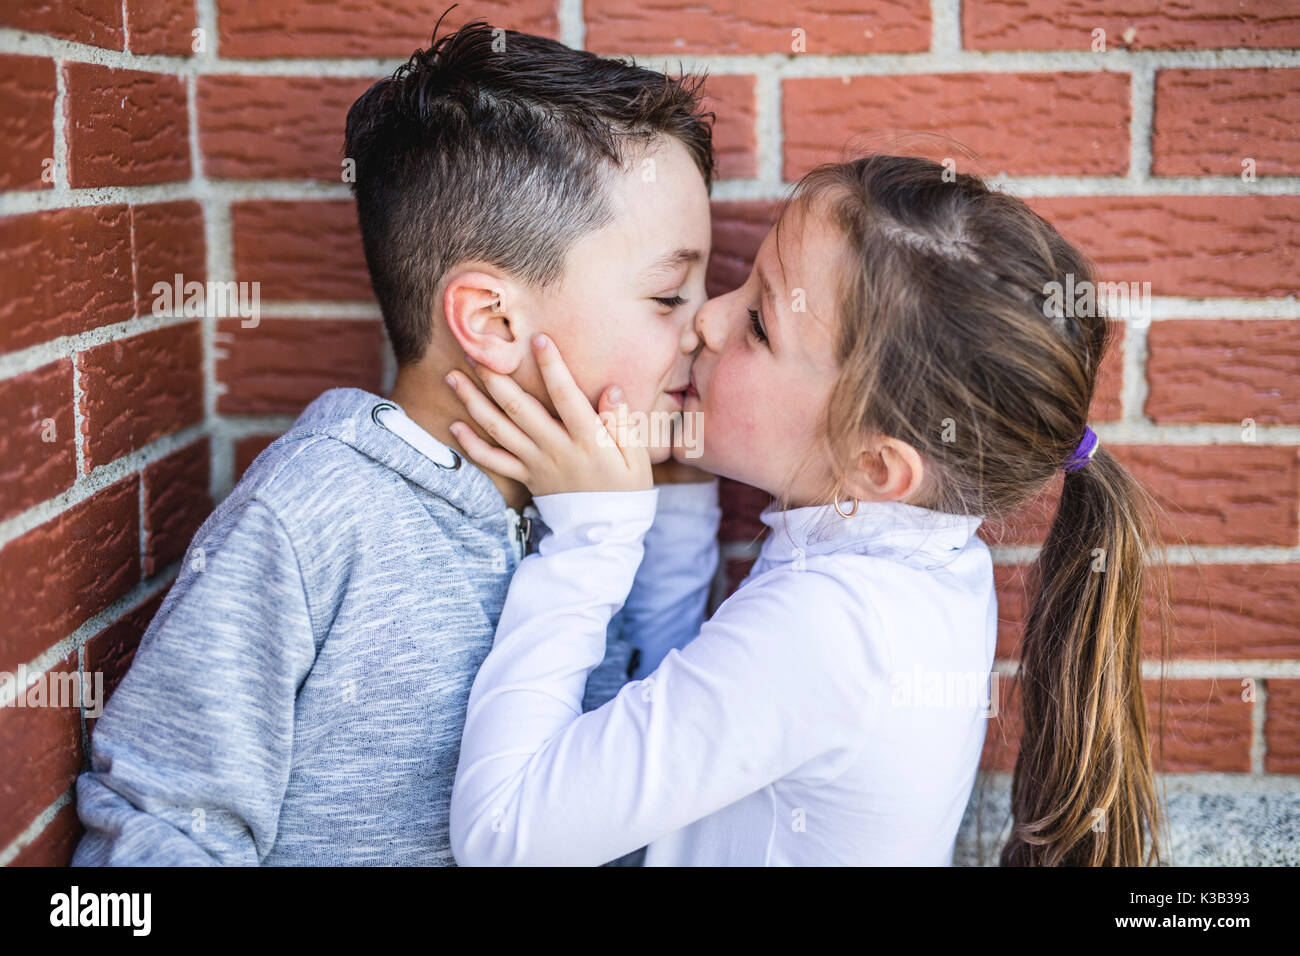 First love and kiss two happy cute kids meeting Stock Photo - Alamy